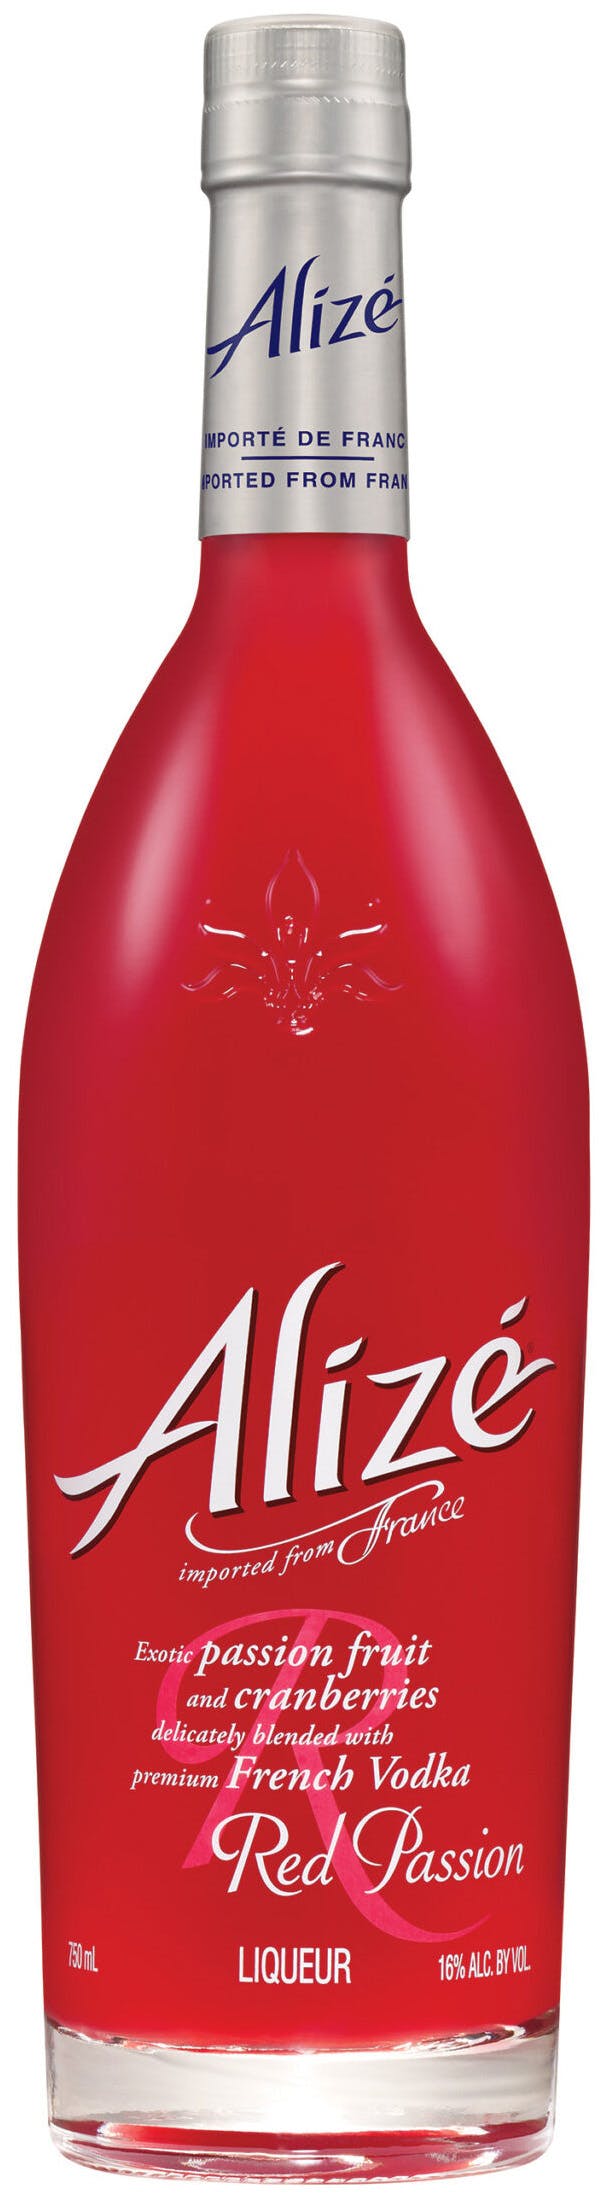 Alize Red Passion 750ml - M & M Liquor and Market